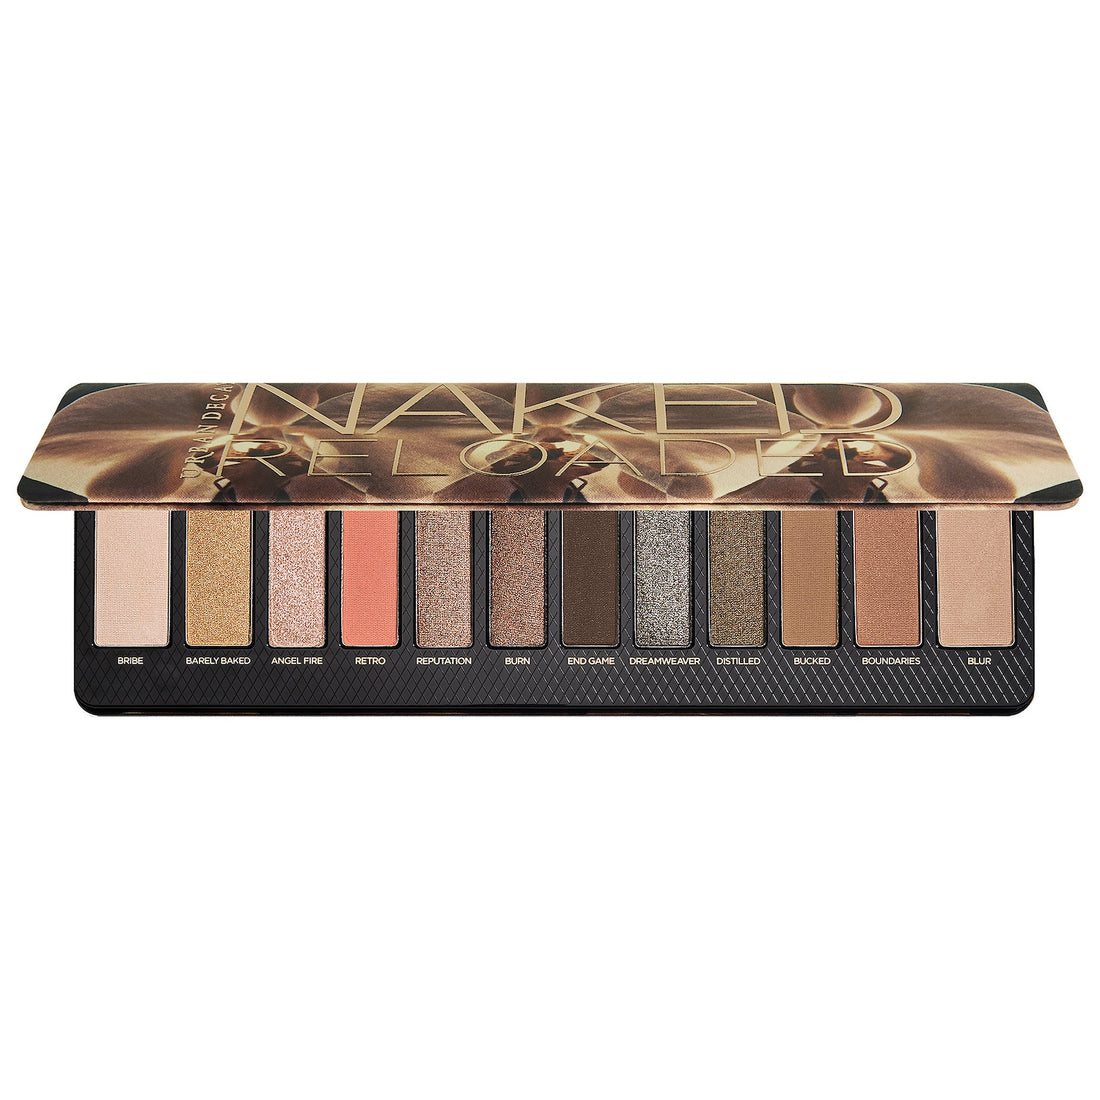 Naked Reloaded Eyeshadow Palette - Urban Decay.